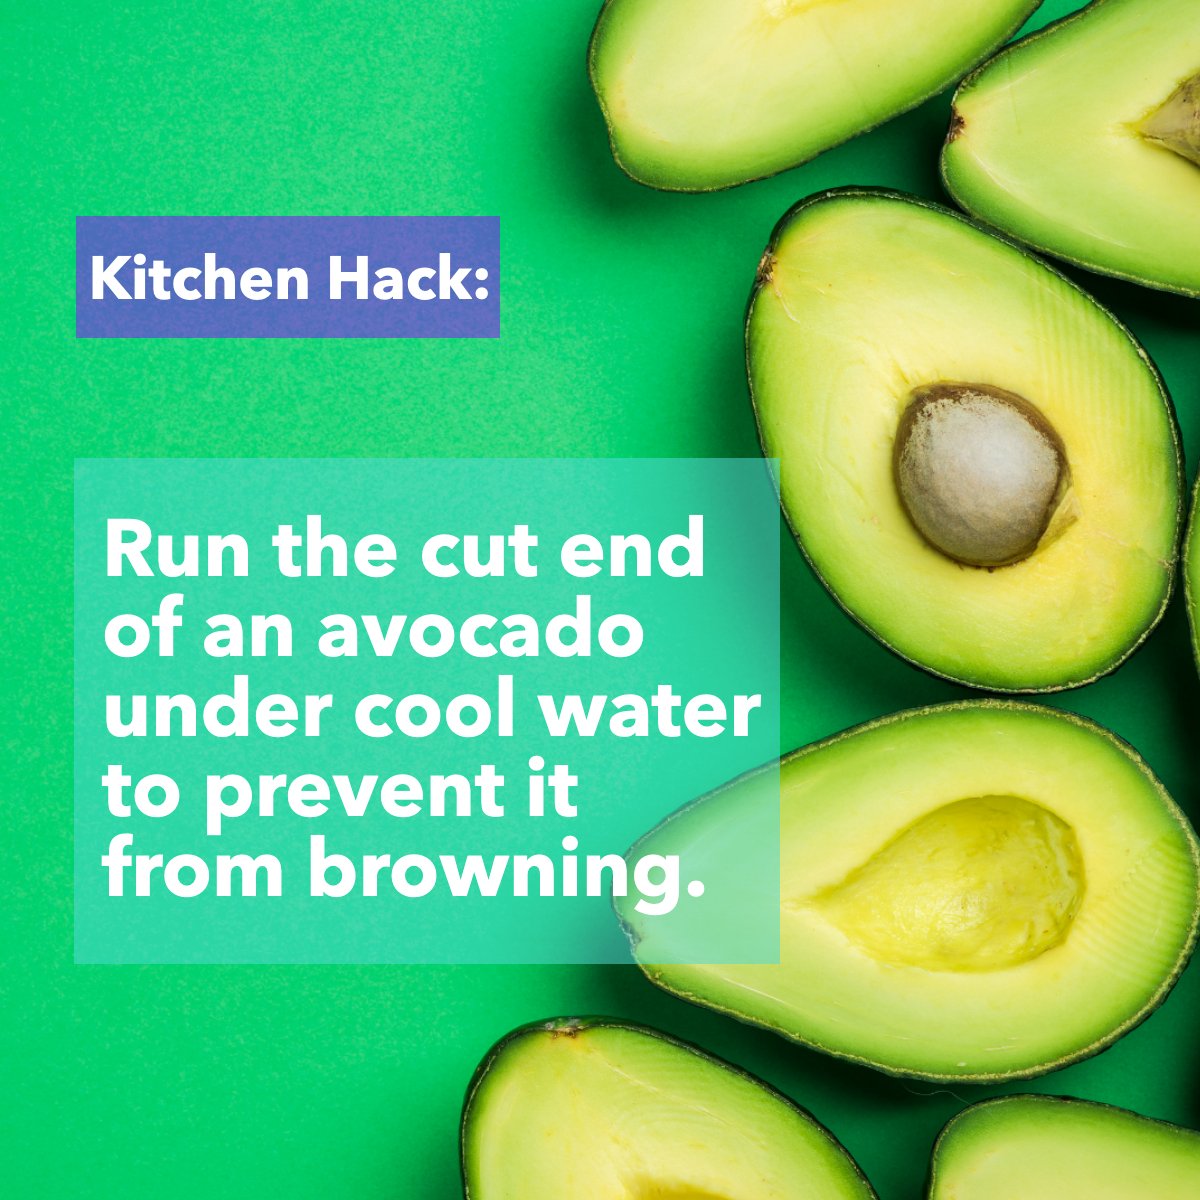 Did you know this? 🤔... now you'll eat your avocados without browning. 

#tip #avocados #kitchen #food
 #buyersagent #listingspecialist #militaryrelocation #realtor #buysellinvest #BuyAndSellWithMartina